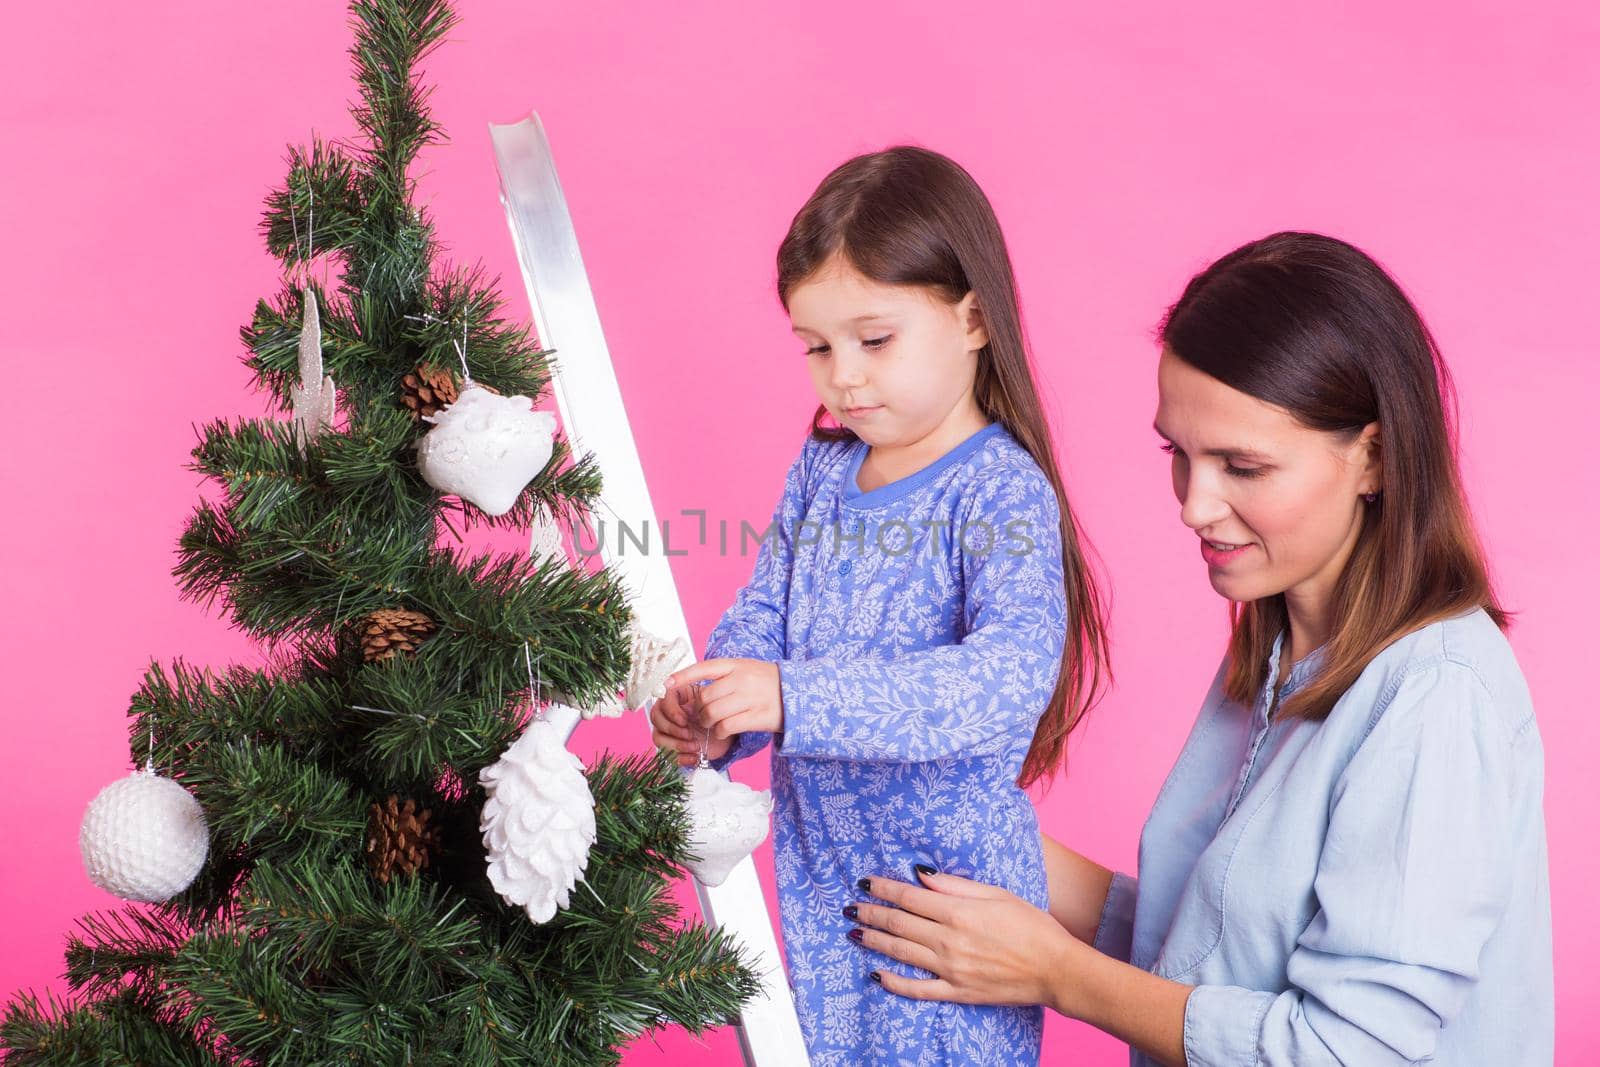 Holidays, family and christmas concept - mother and daughter decorating christmas tree on pink background